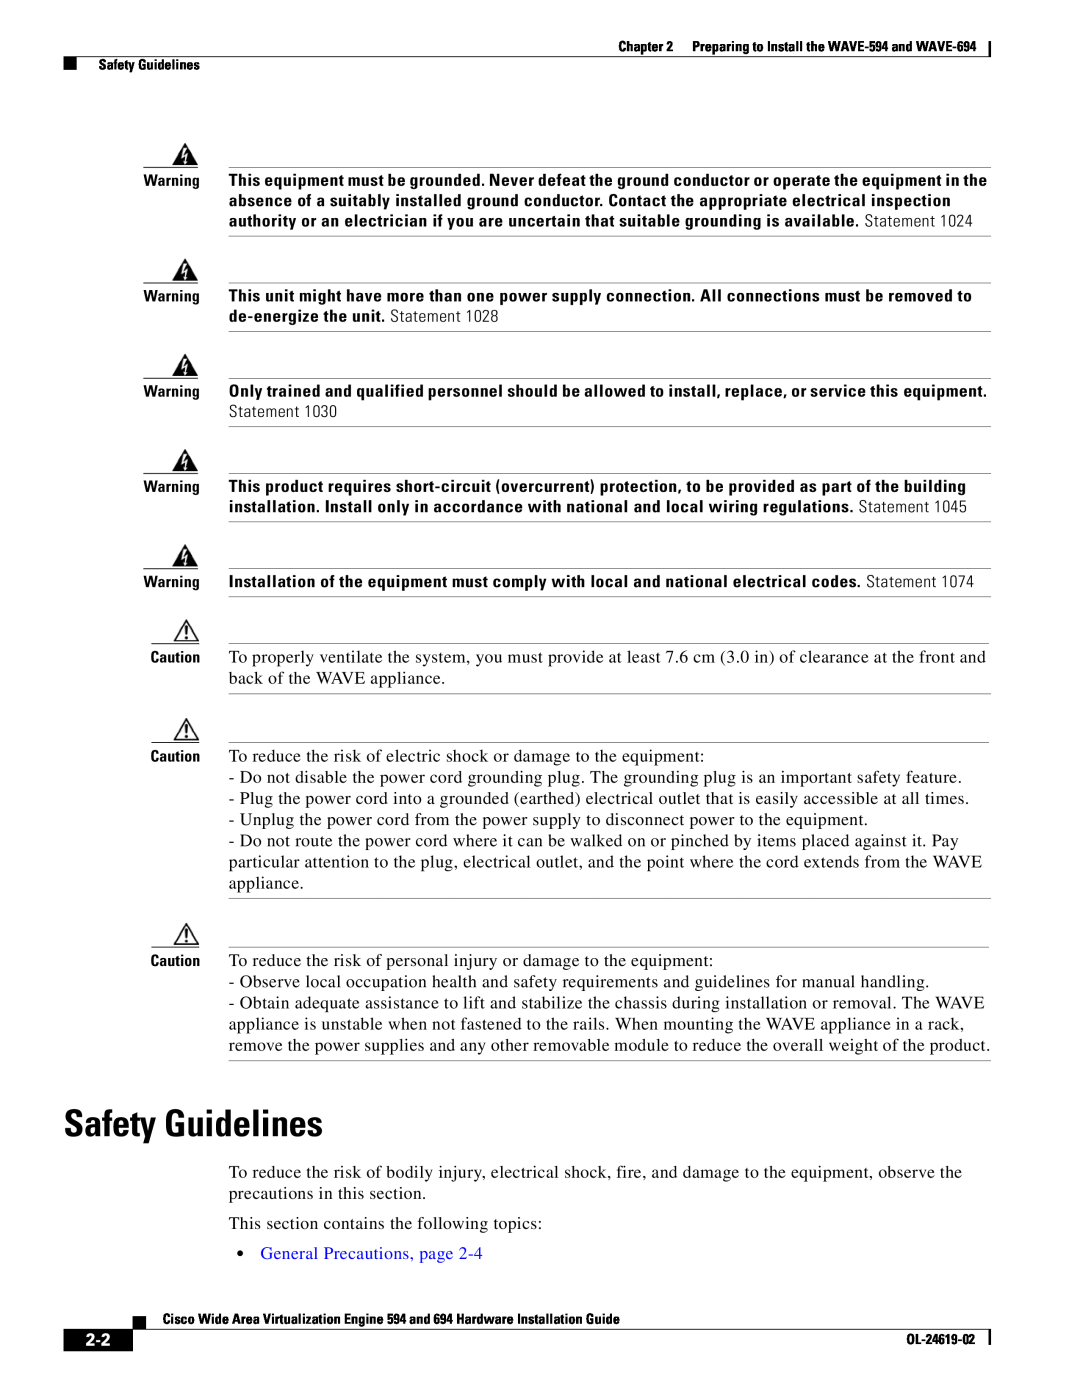 Cisco Systems WAVE594K9, 694 manual Safety Guidelines, General Precautions, page 